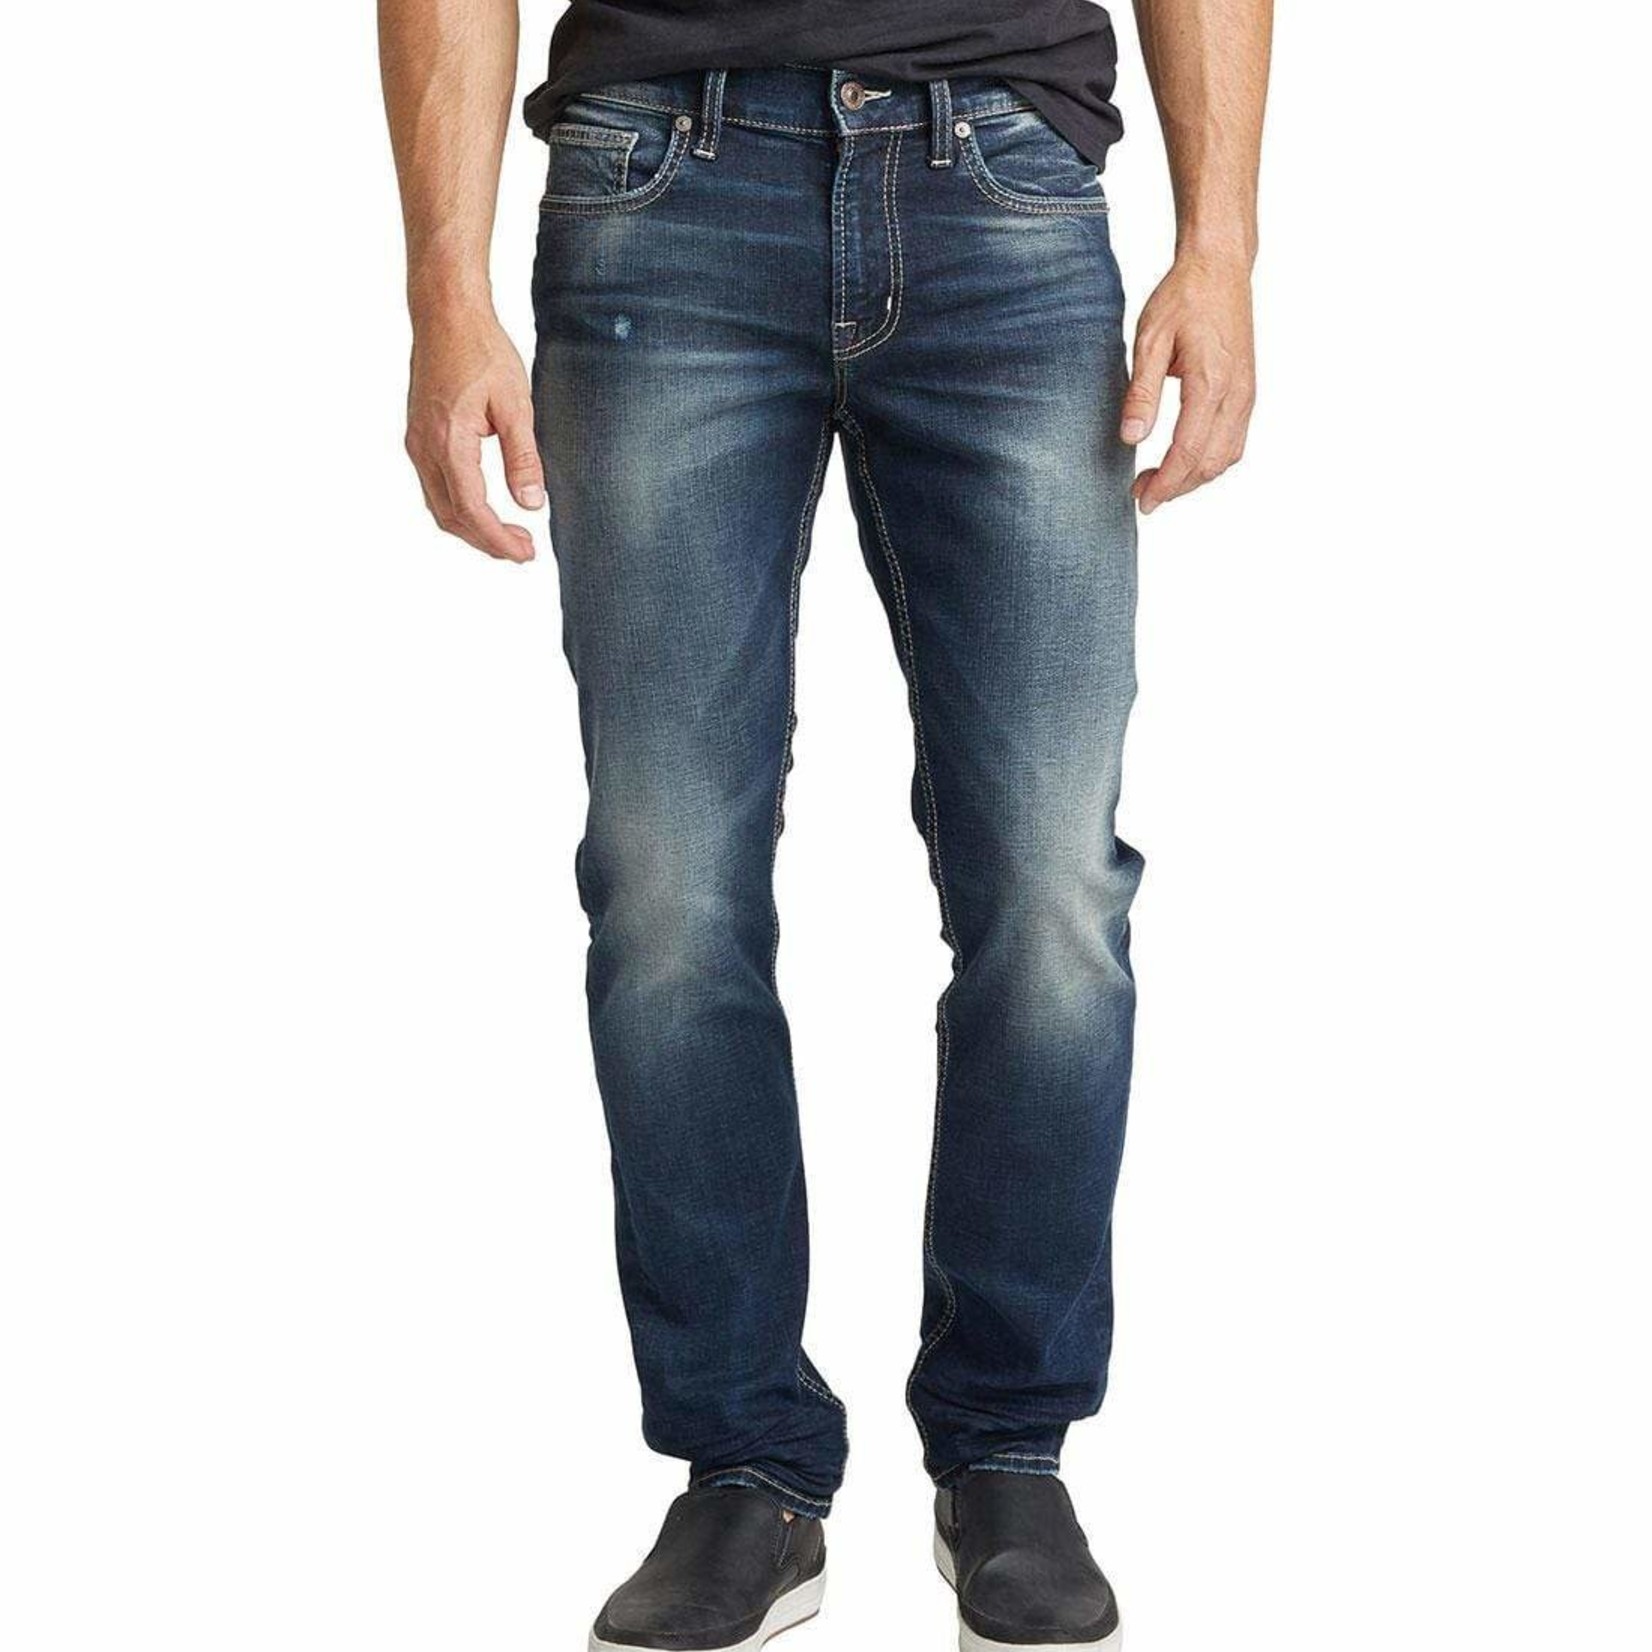 Silver Jeans The "Taavi RAS333" by Silber Jeans Canada